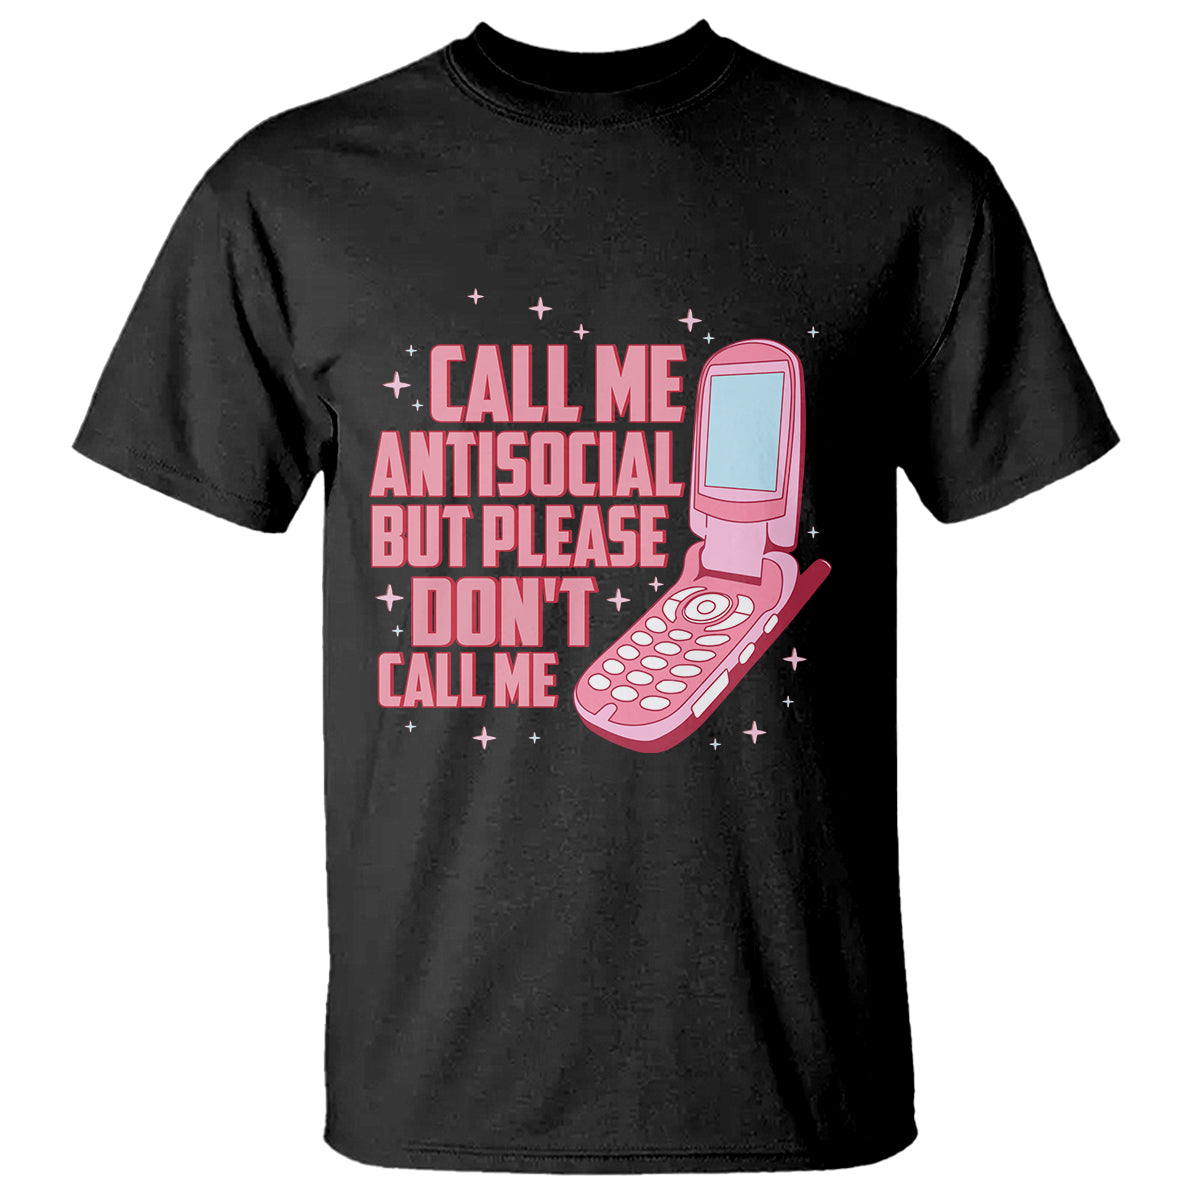 Introvert T Shirt Call Me Antisocial But Please Don't Call Me TS09 Black Printyourwear